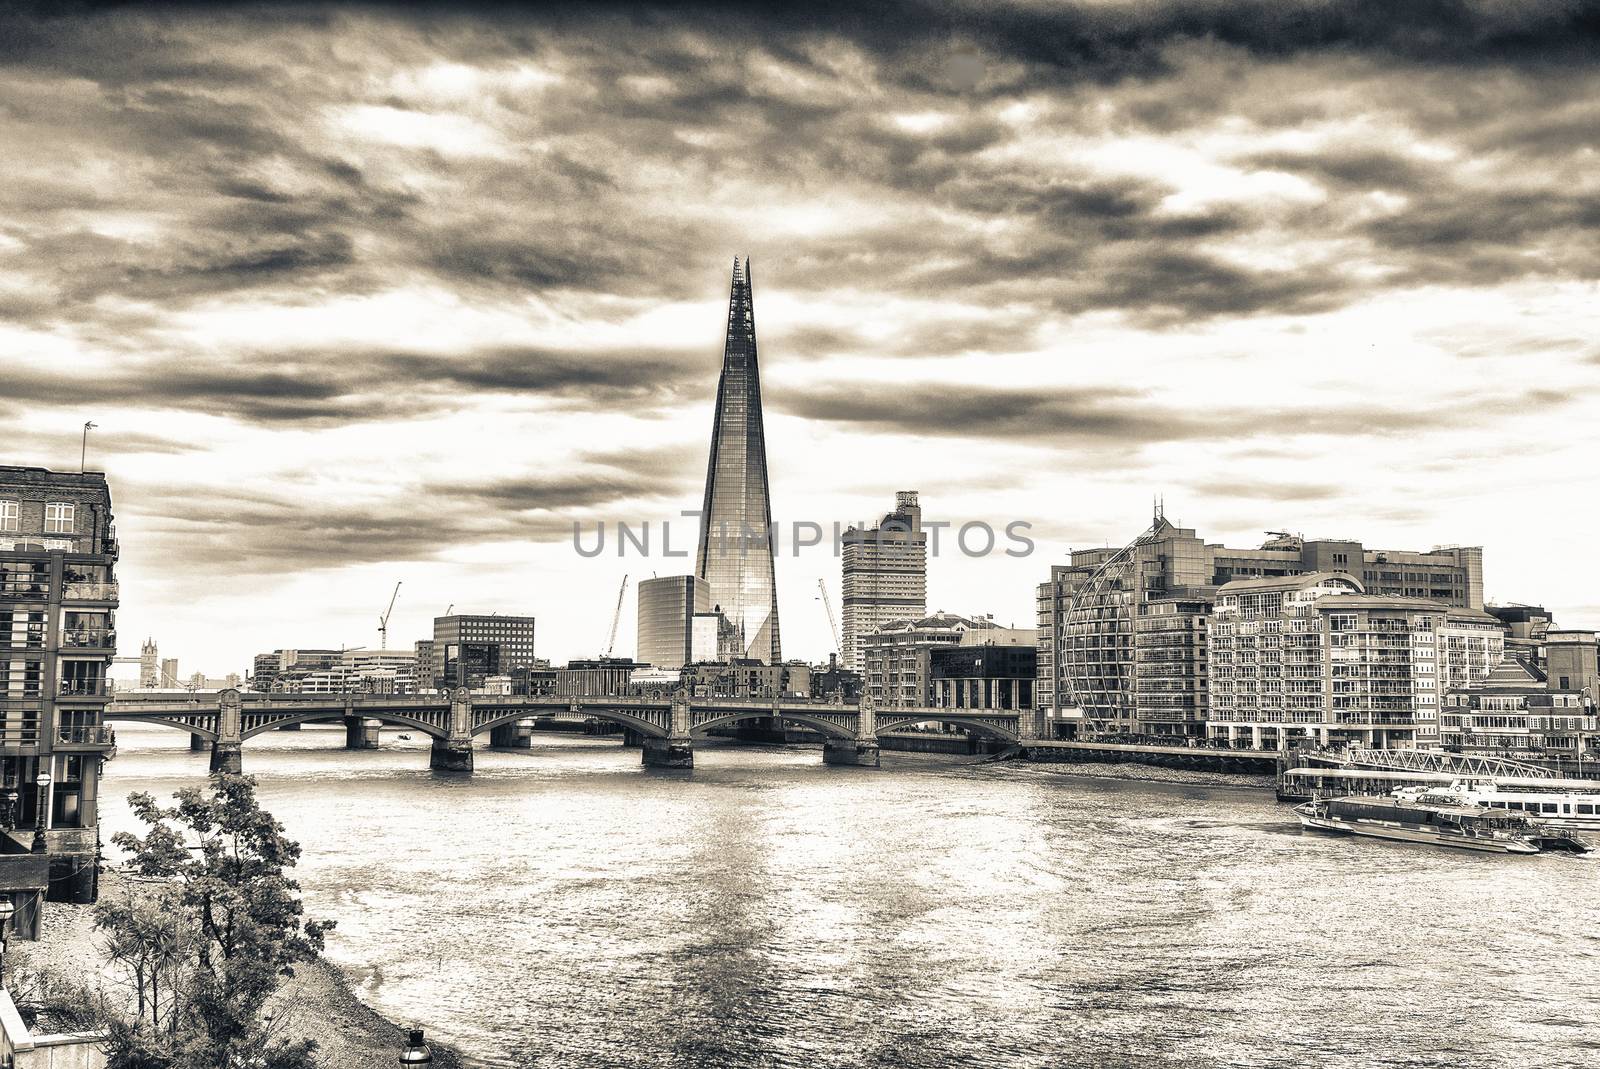 London skyline and Thames river on a cloudy day by jovannig